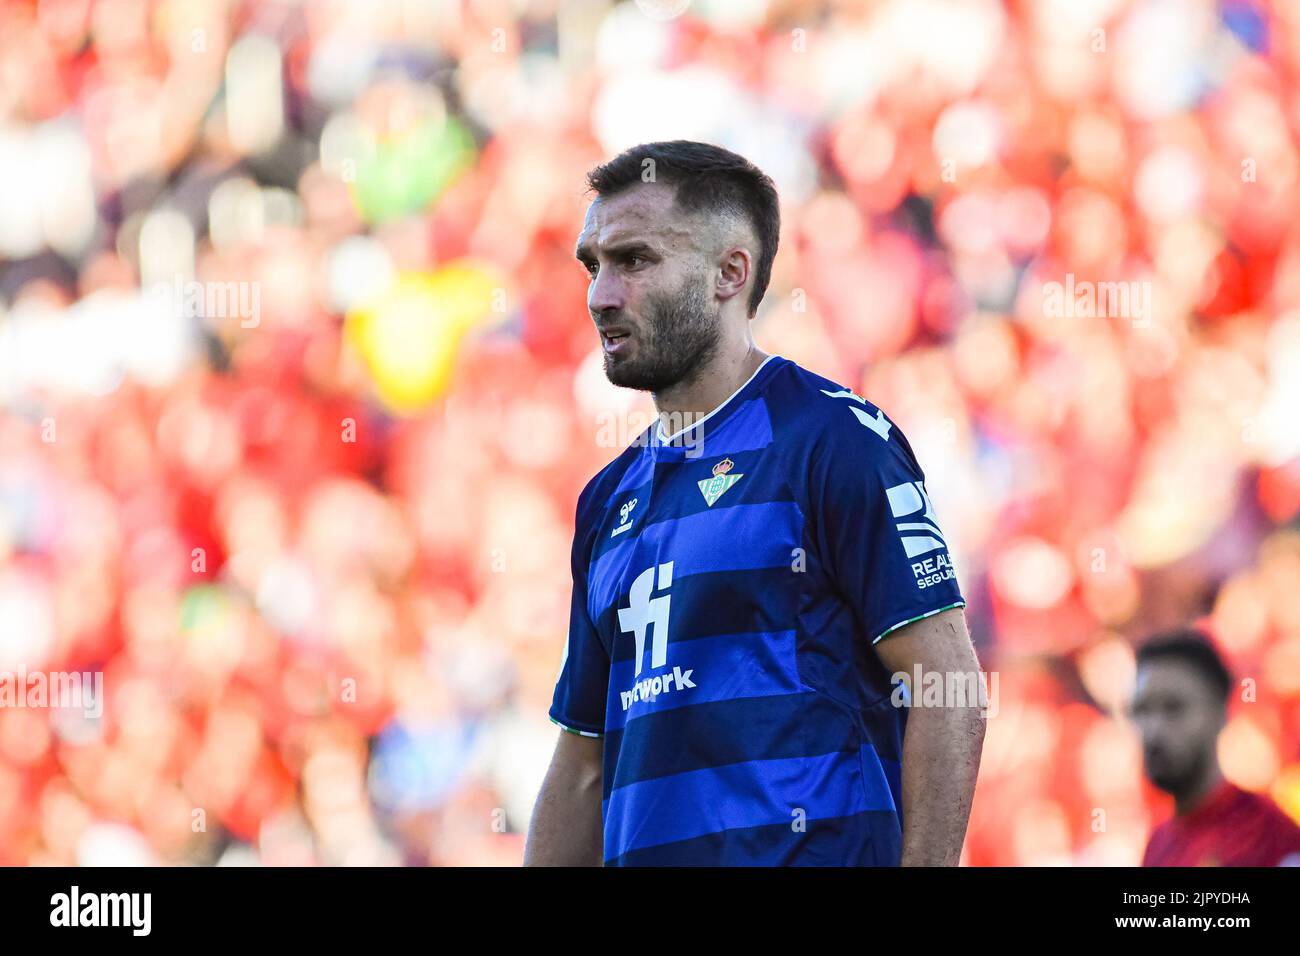 MALLORCA, SPAIN - AUGUST 20: German Pezzella of Real Betis in the match between RCD Mallorca and Real Betis of La Liga Santander on August 20, 2022 at Visit Mallorca Stadium Son Moix in Mallorca, Spain. (Photo by Samuel Carreño/PxImages) Stock Photo